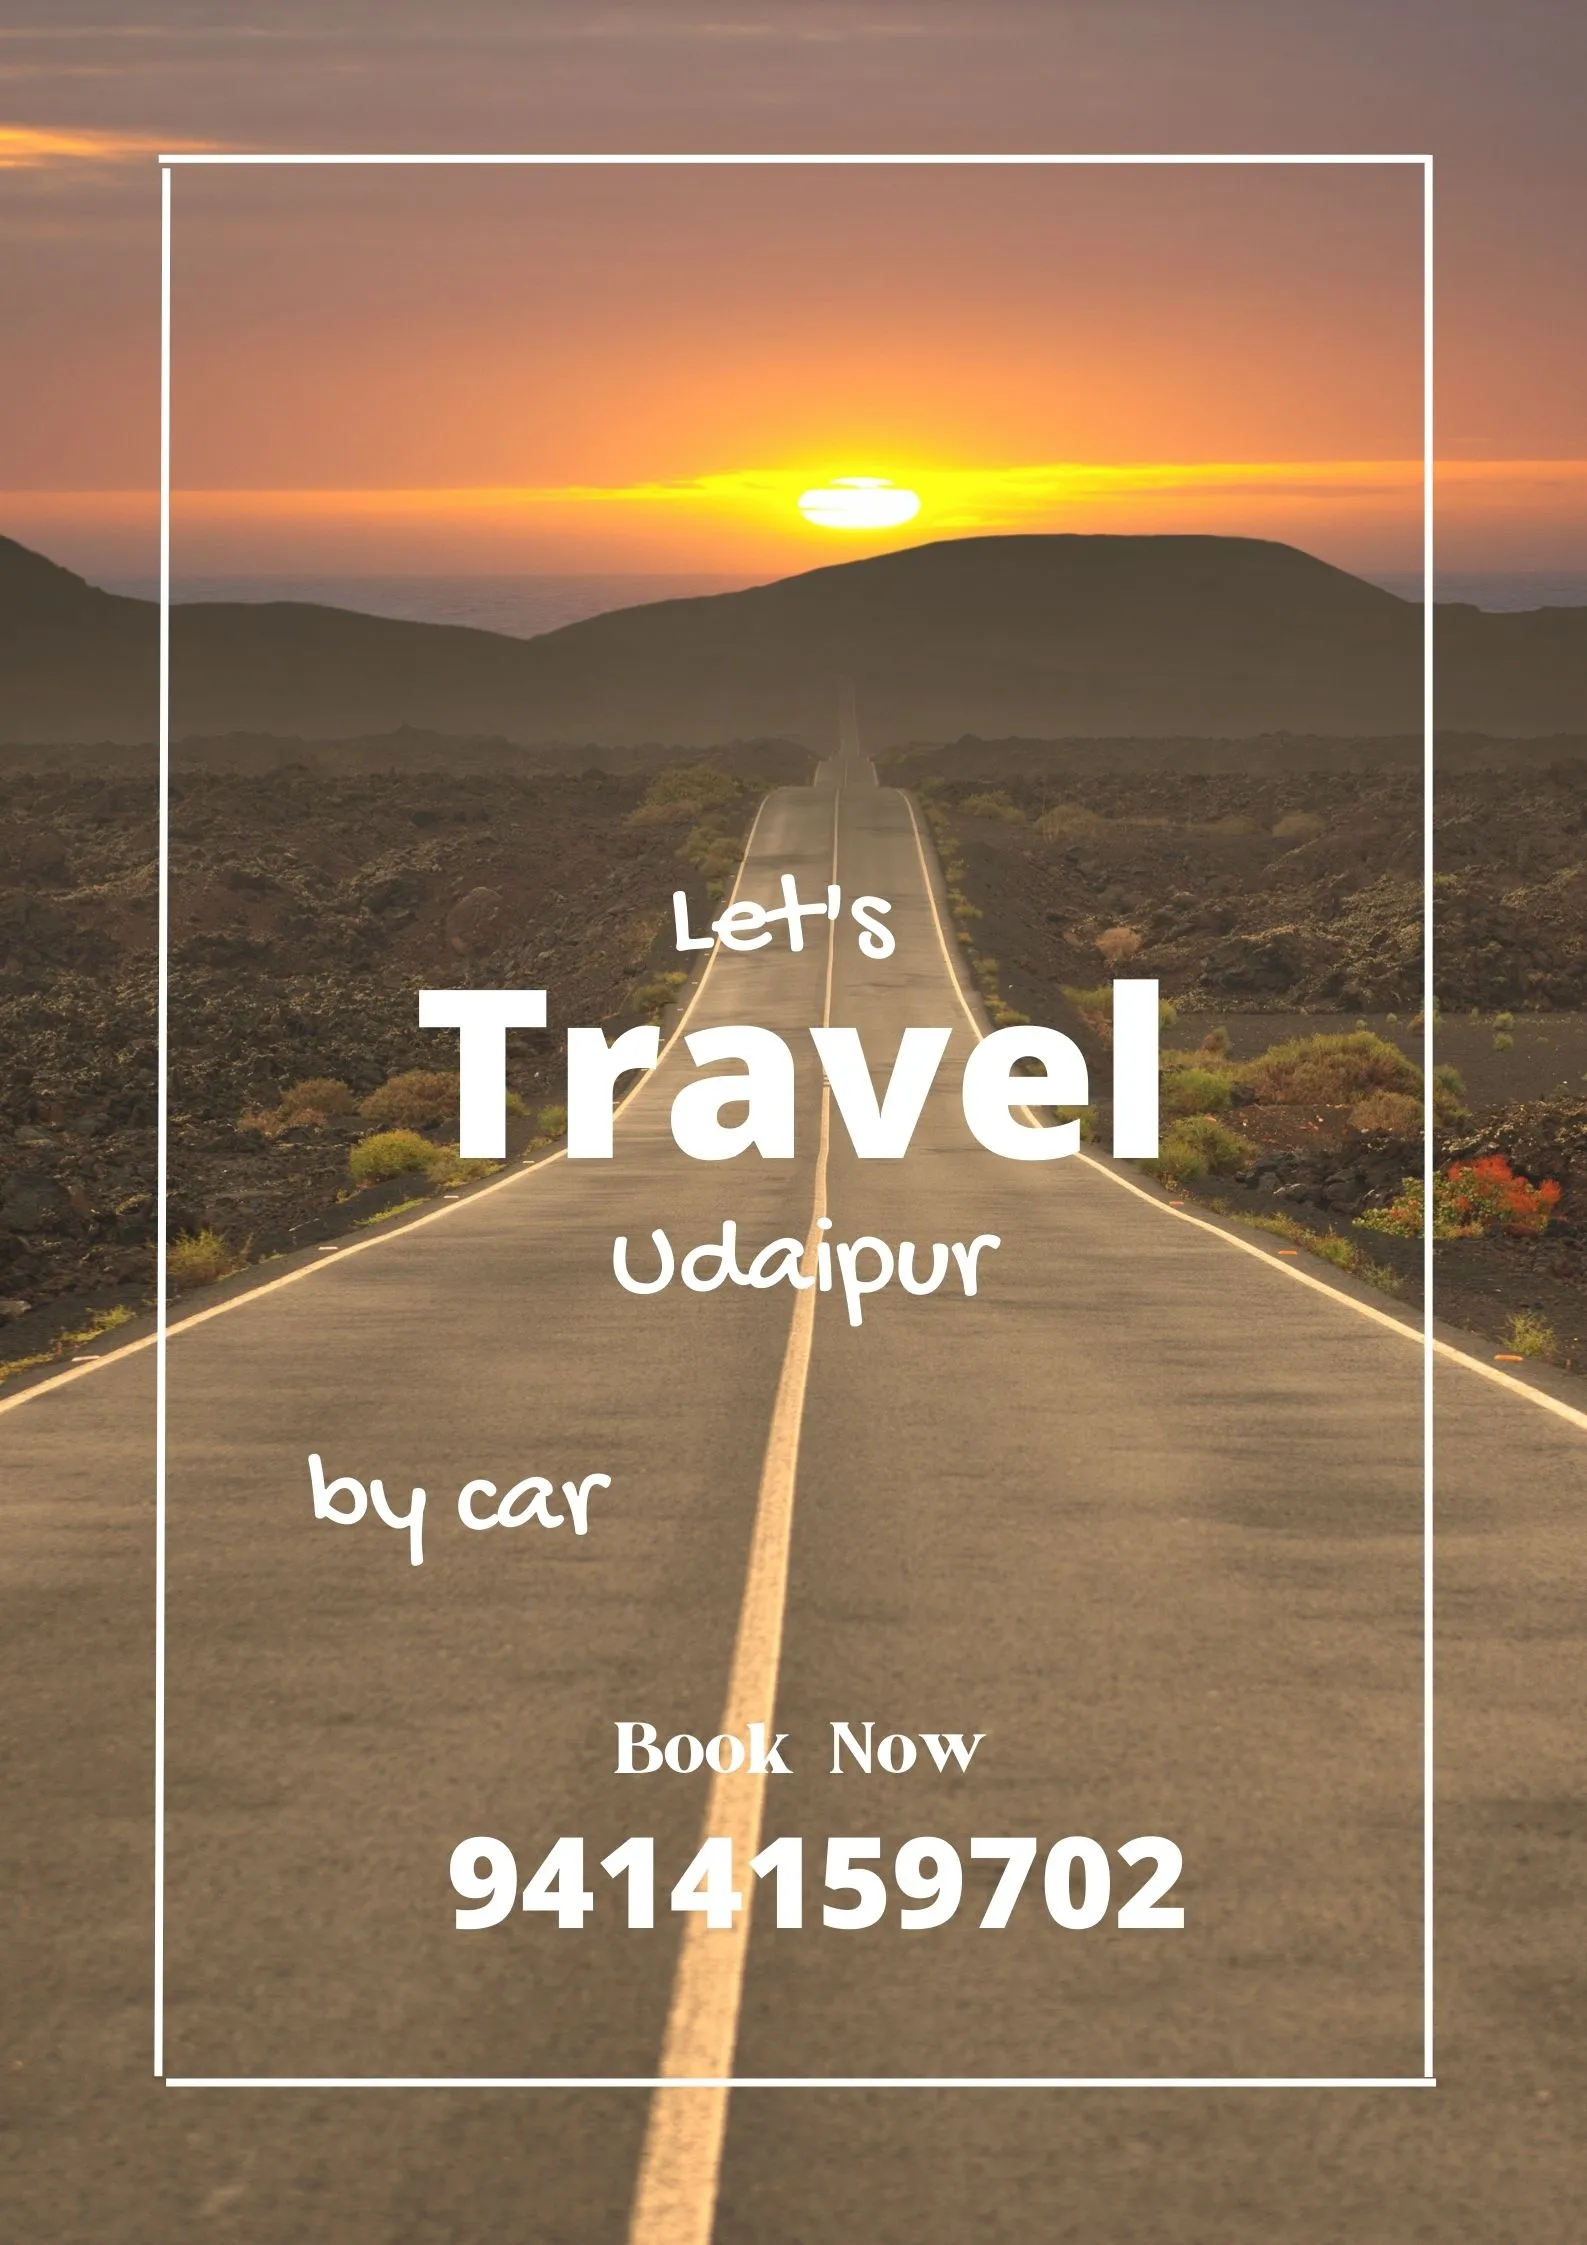 How to get to and from Udaipur Airport